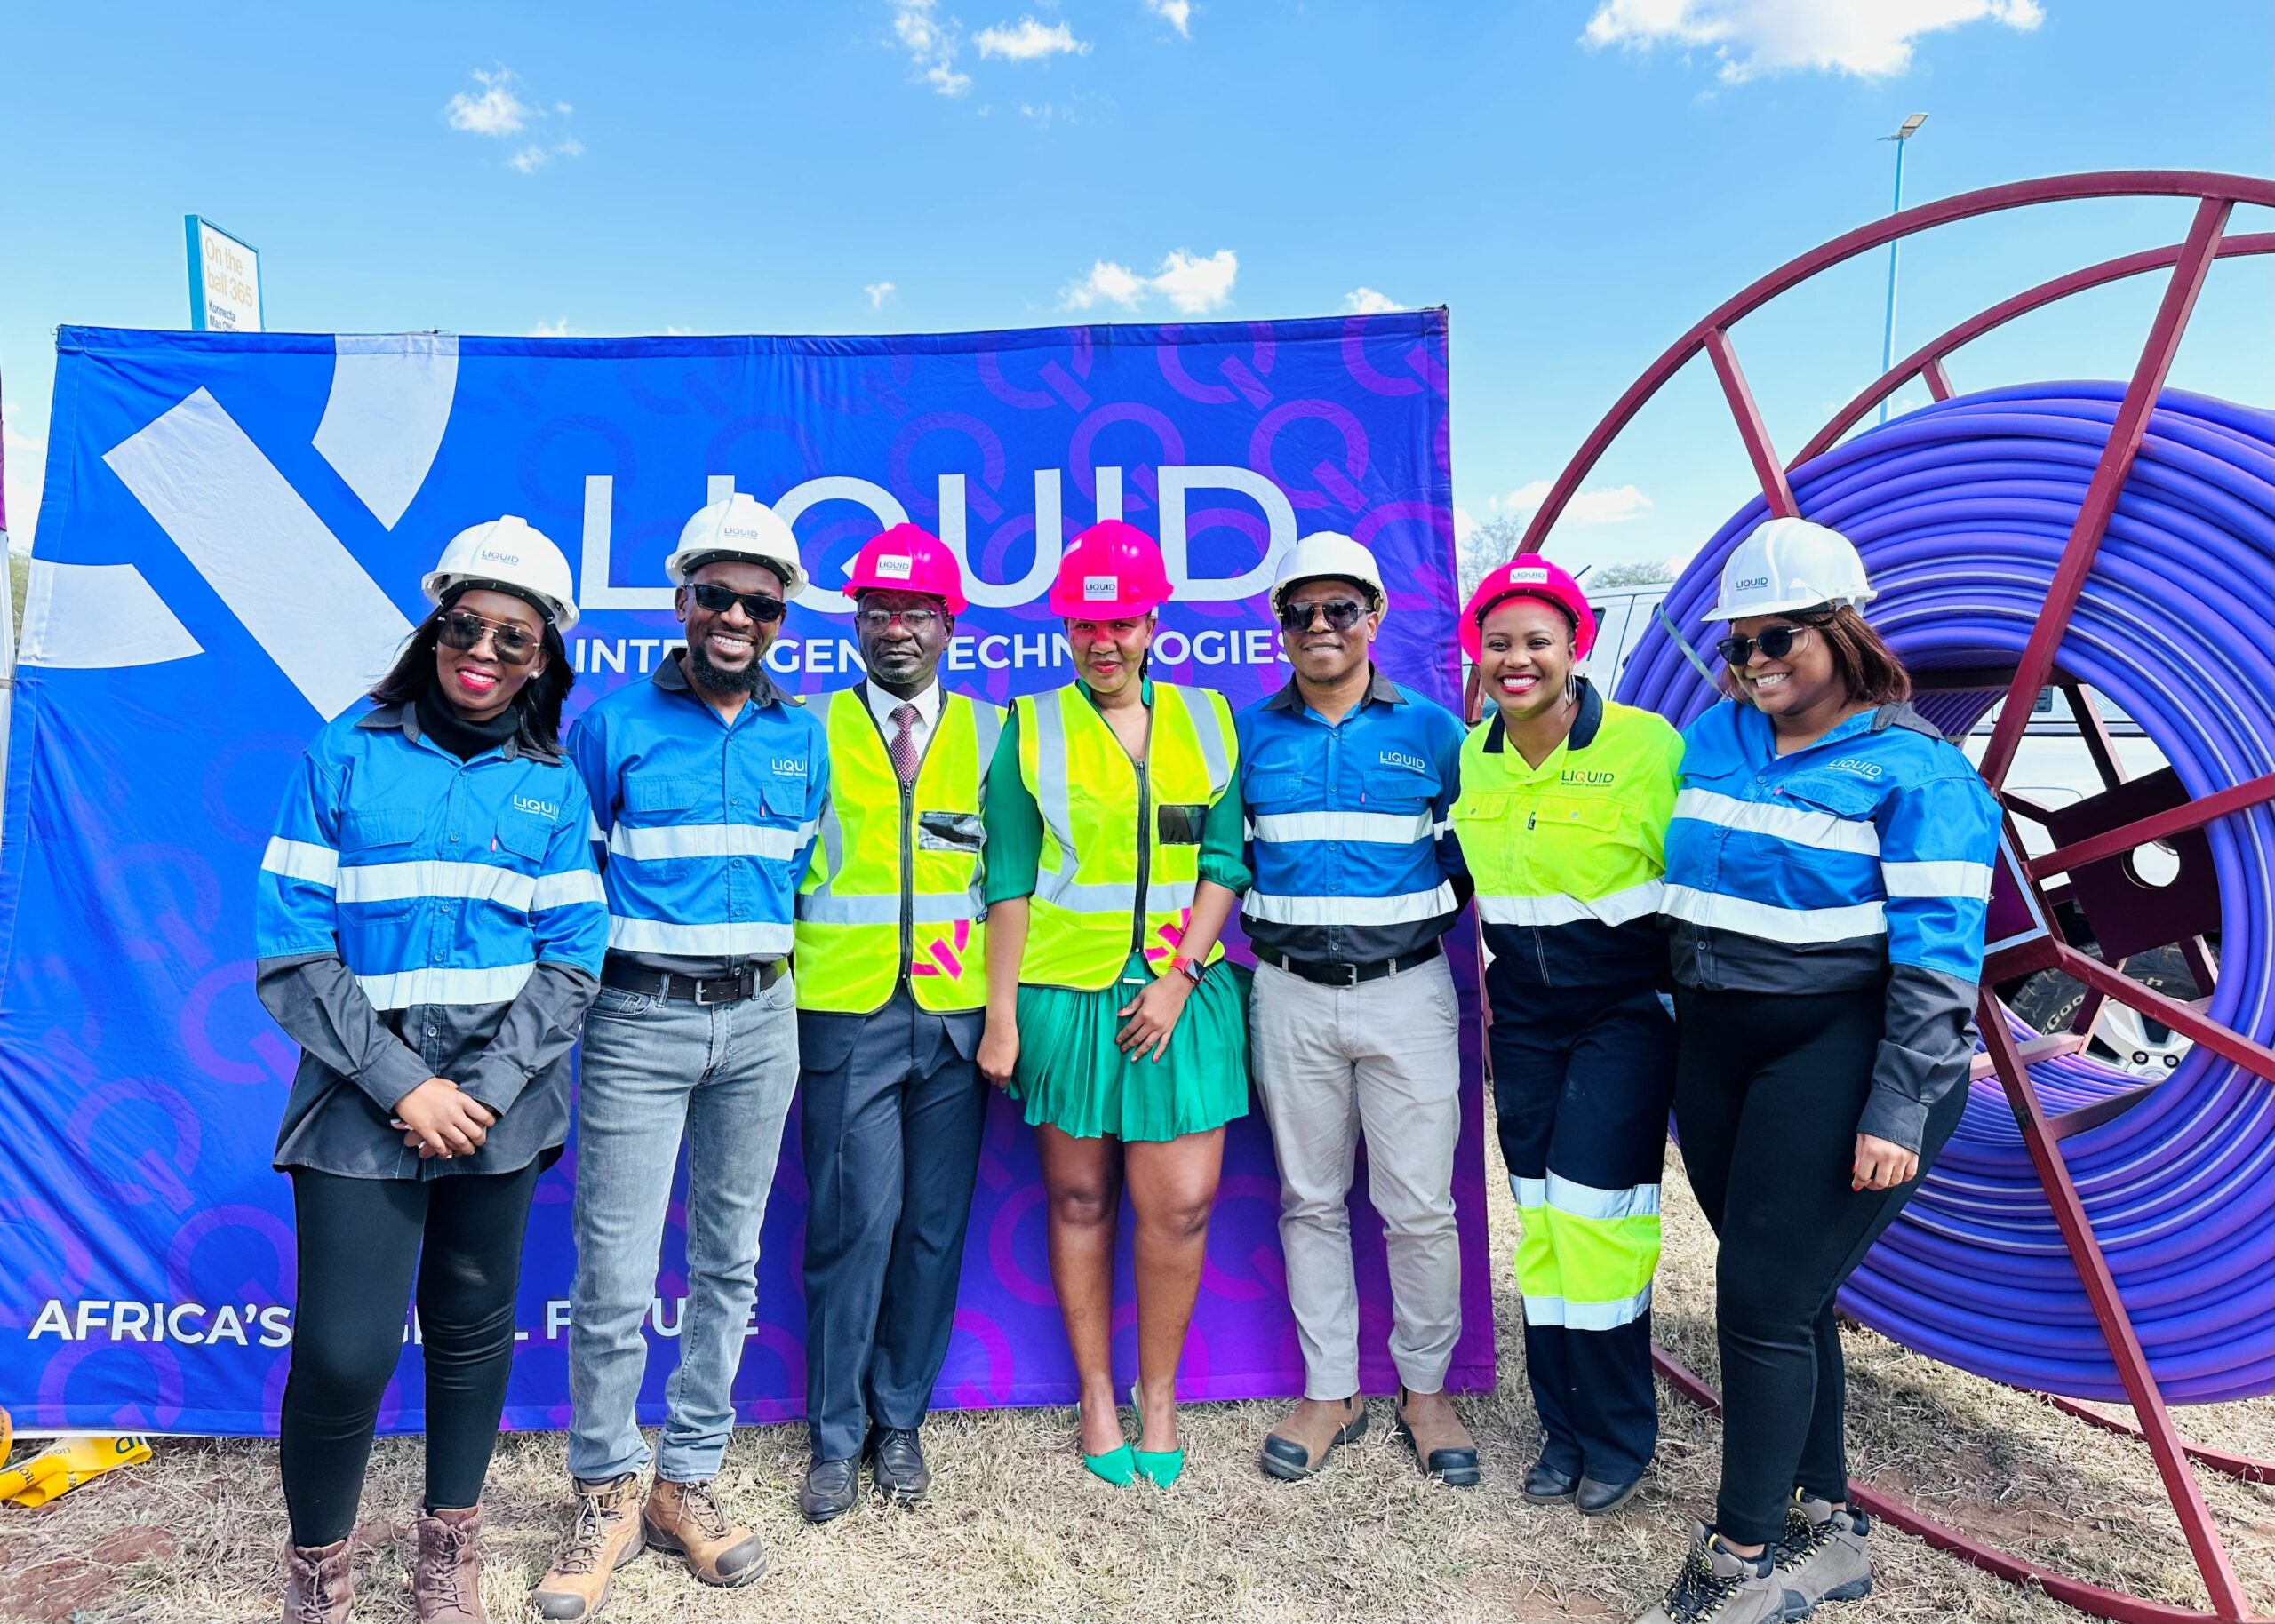 Liquid Intelligent Technologies, a Cassava Technologies business, and a pan-African technology group, unveils the Gaborone Metro Ring